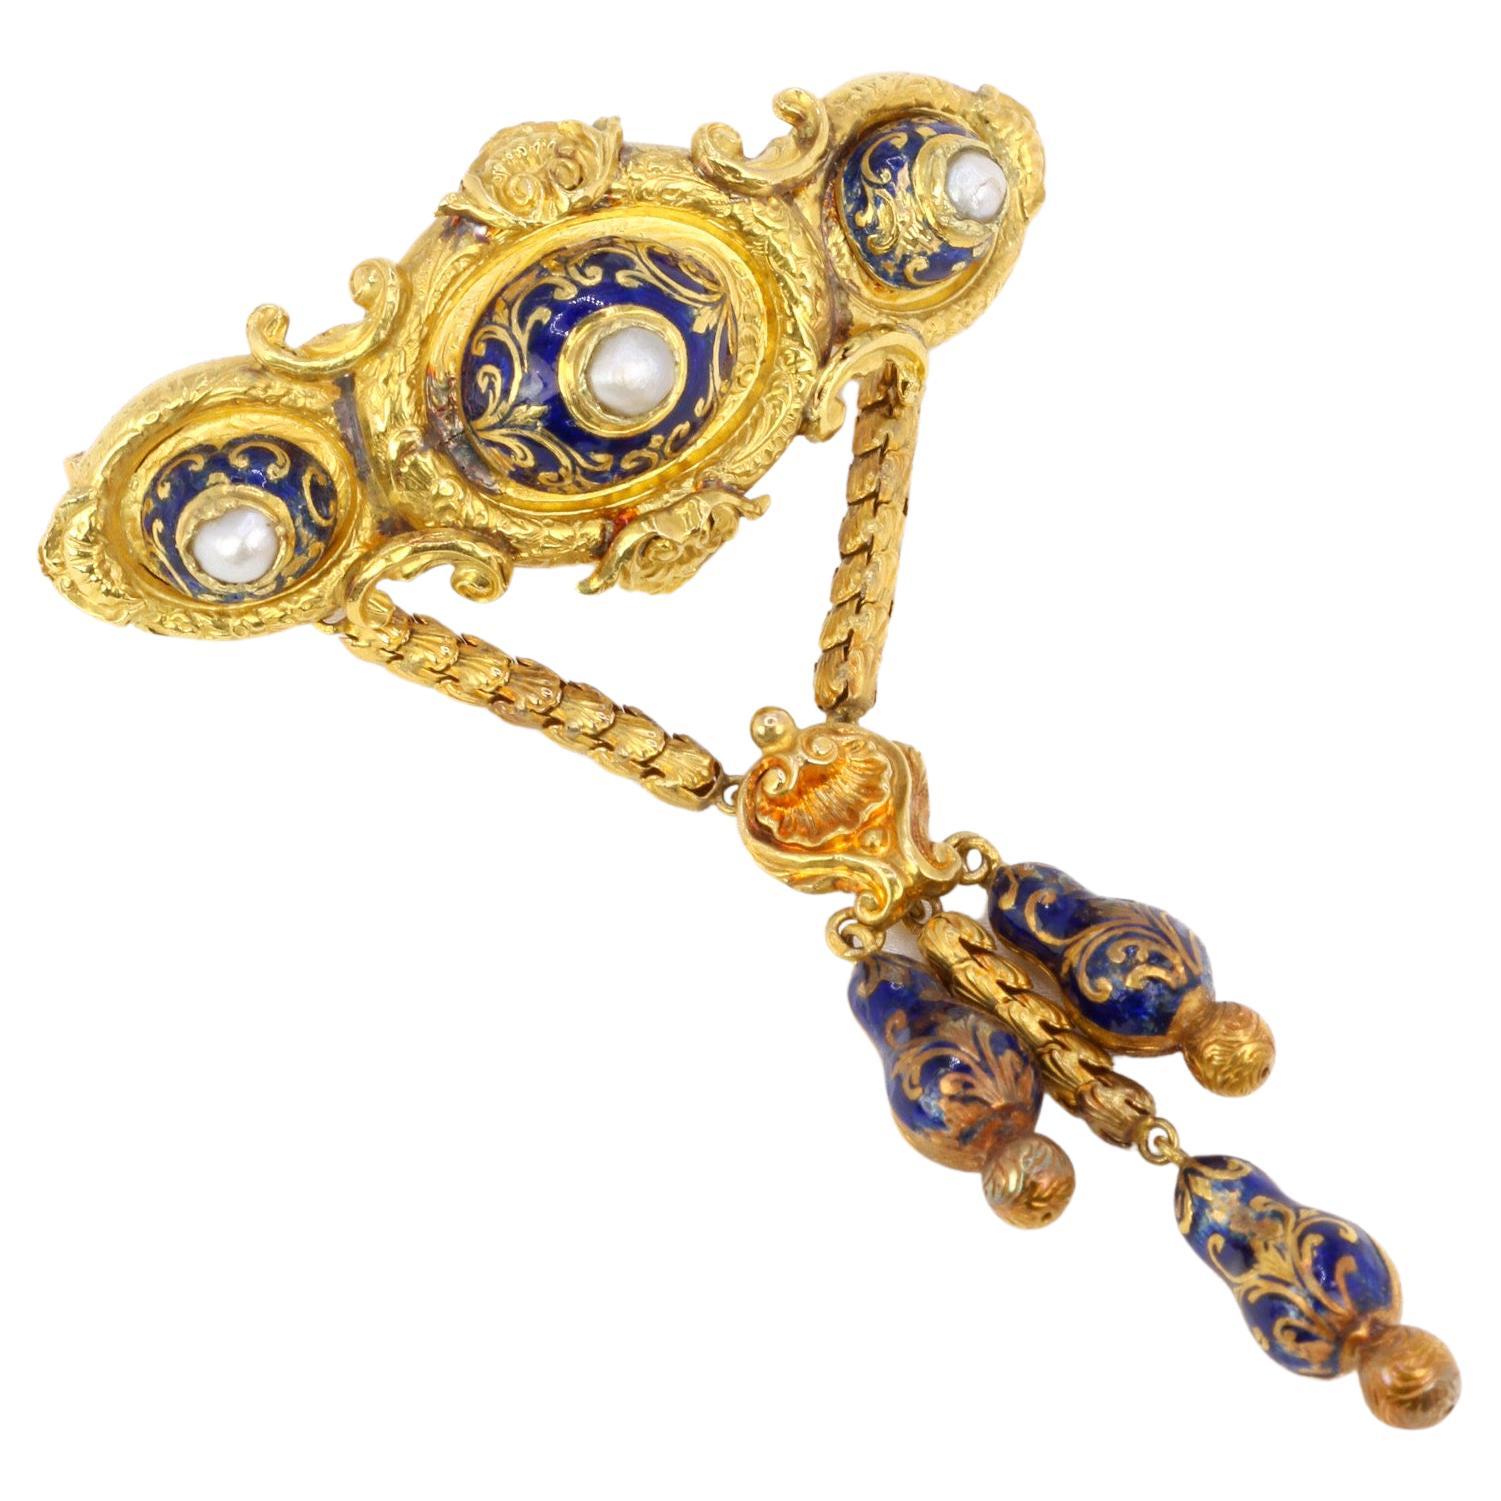 Antique victorian yellow gold and blue enamel brooch set with pearls For Sale